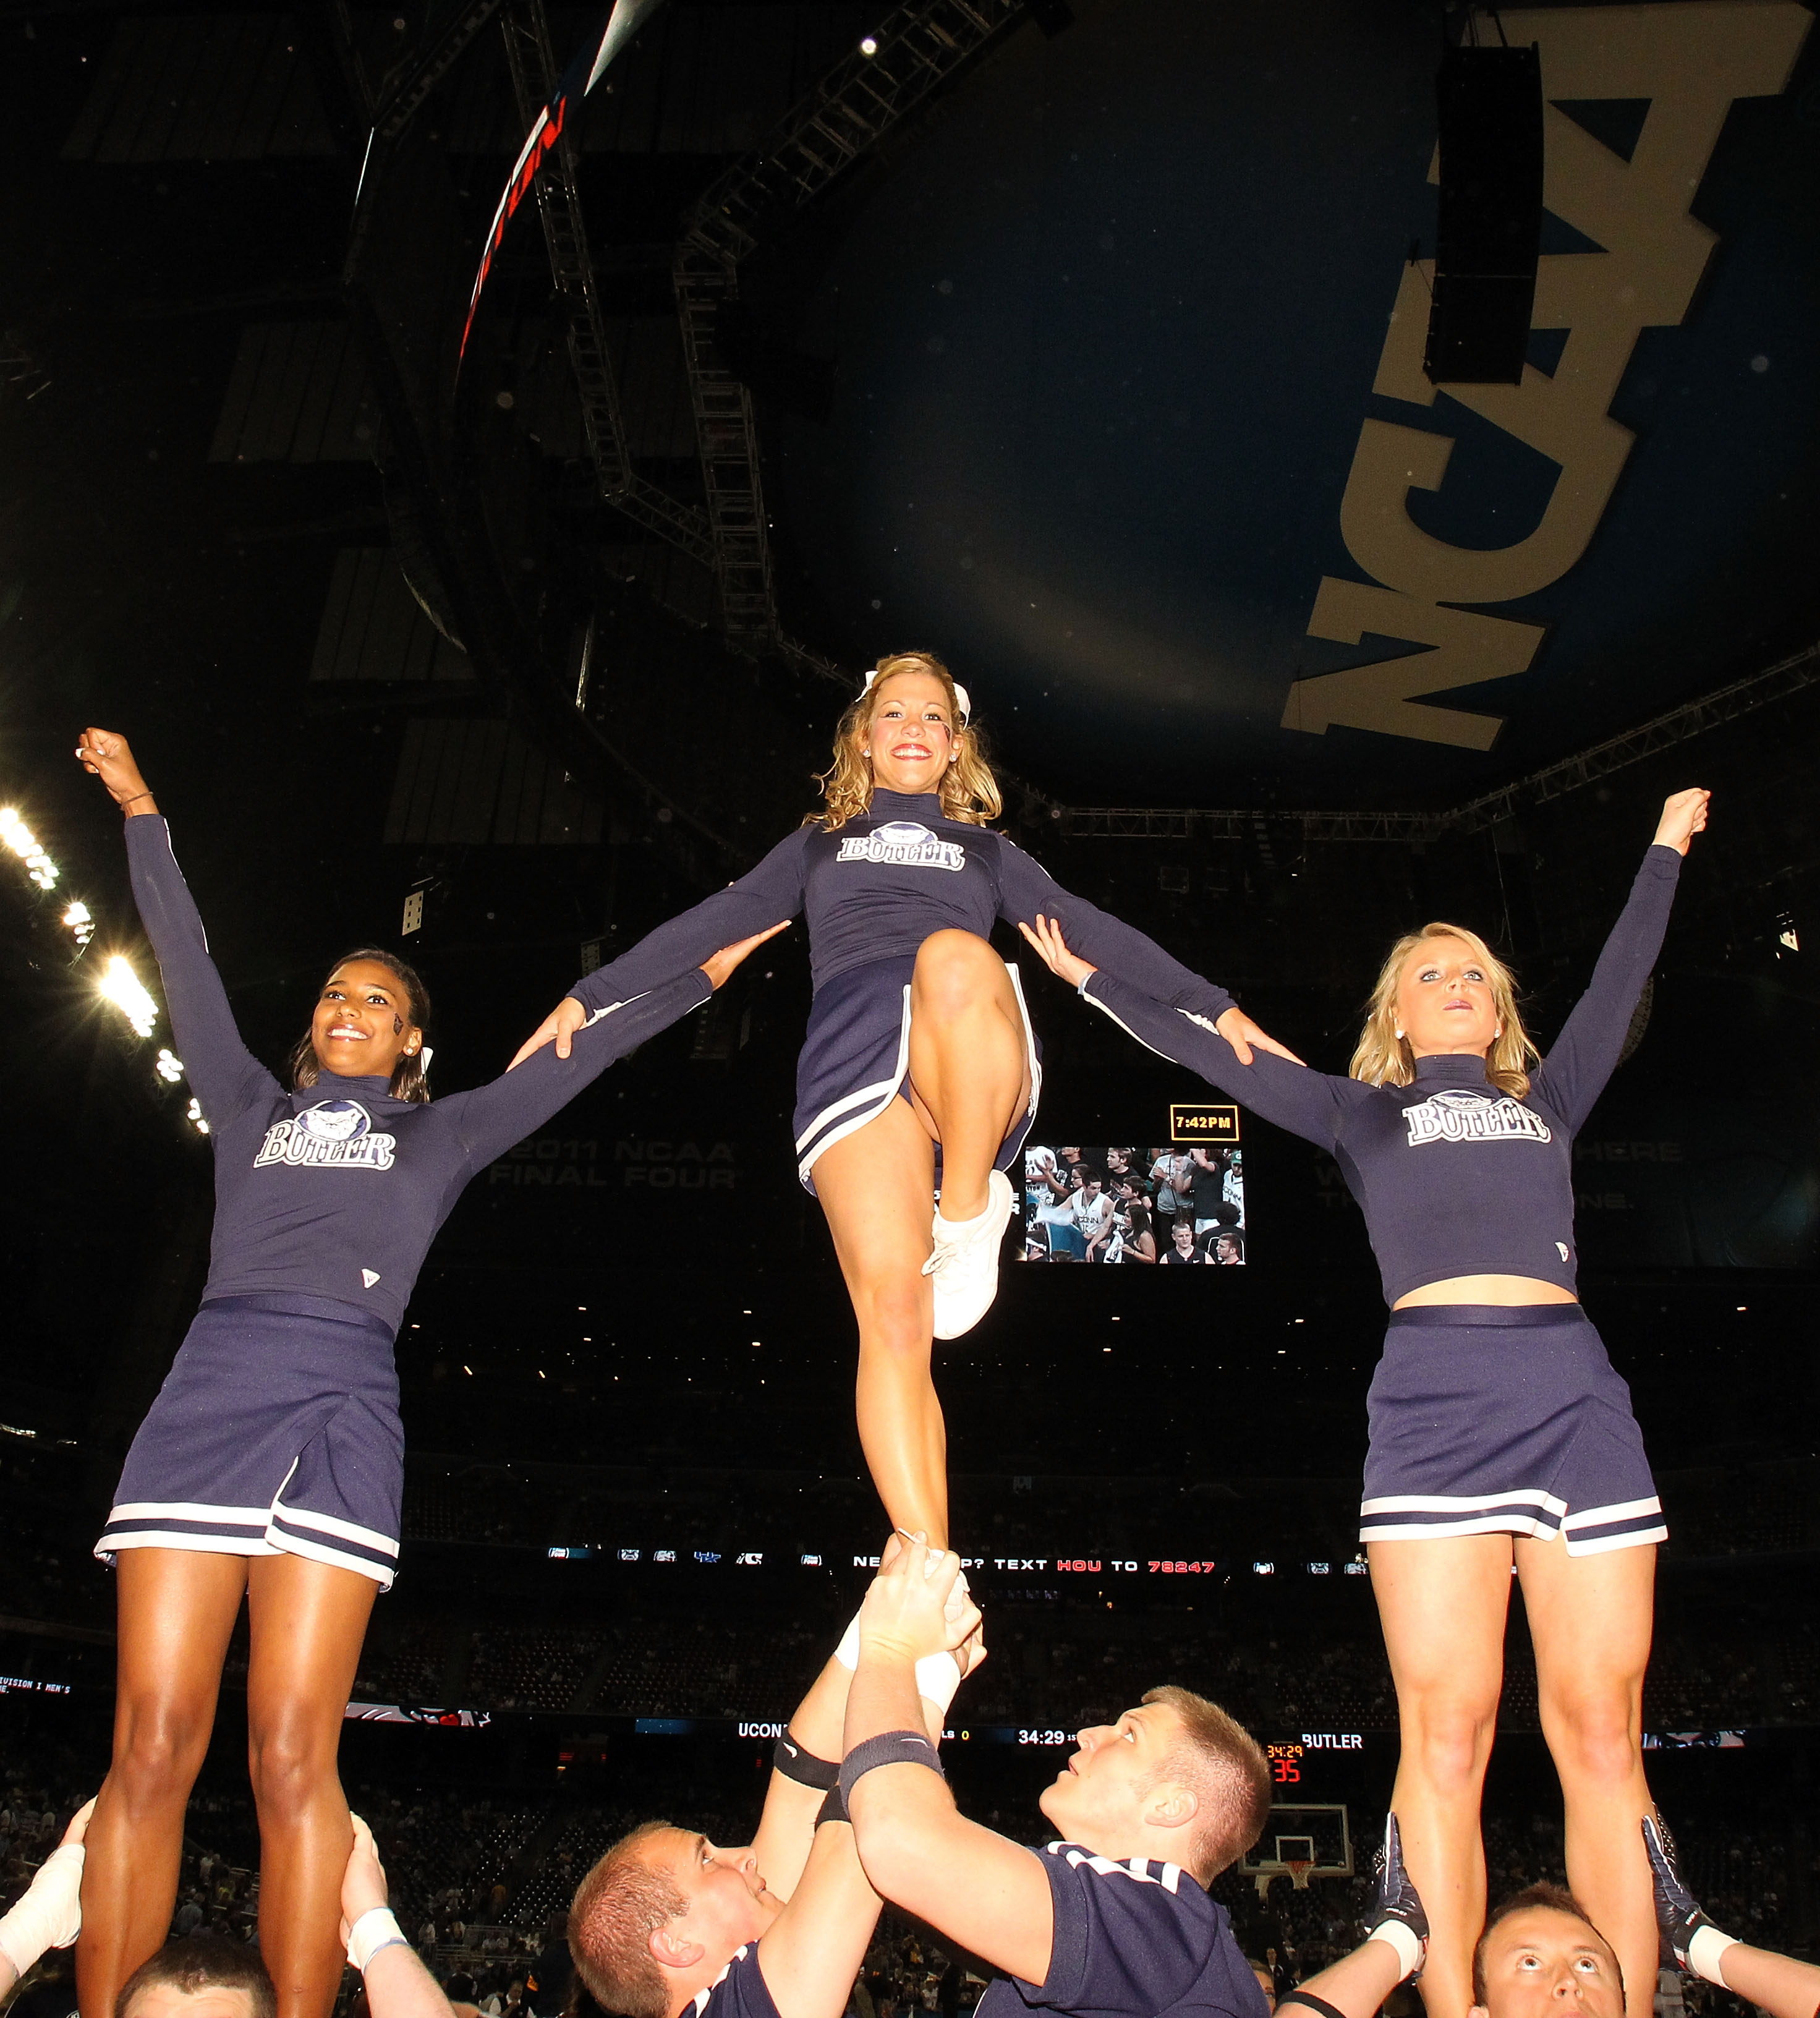 HOUSTON, TX - APRIL 04:  The Butler Bulldogs cheerleaders perform during a break in the game against the Connecticut Huskies during the National Championship Game of the 2011 NCAA Division I Men's Basketball Tournament at Reliant Stadium on April 4, 2011